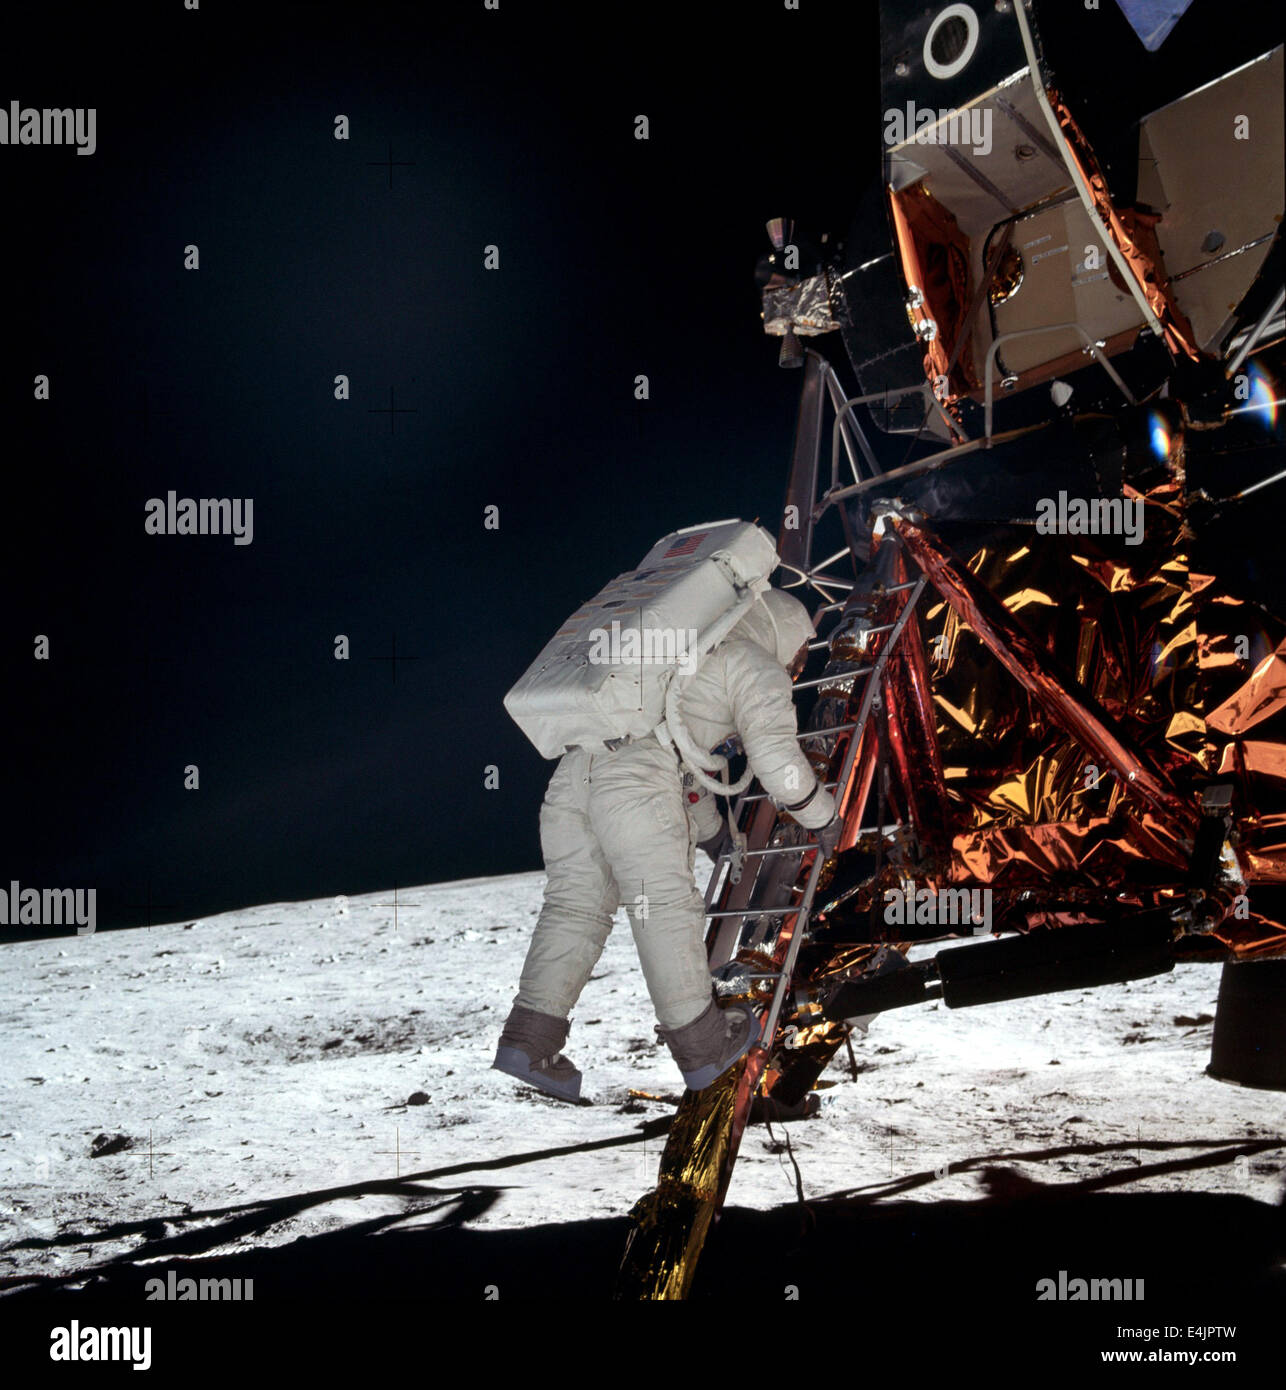 Buzz Aldrin descending ladder of Lunar Module during the Apollo 11 mission to the Moon Stock Photo